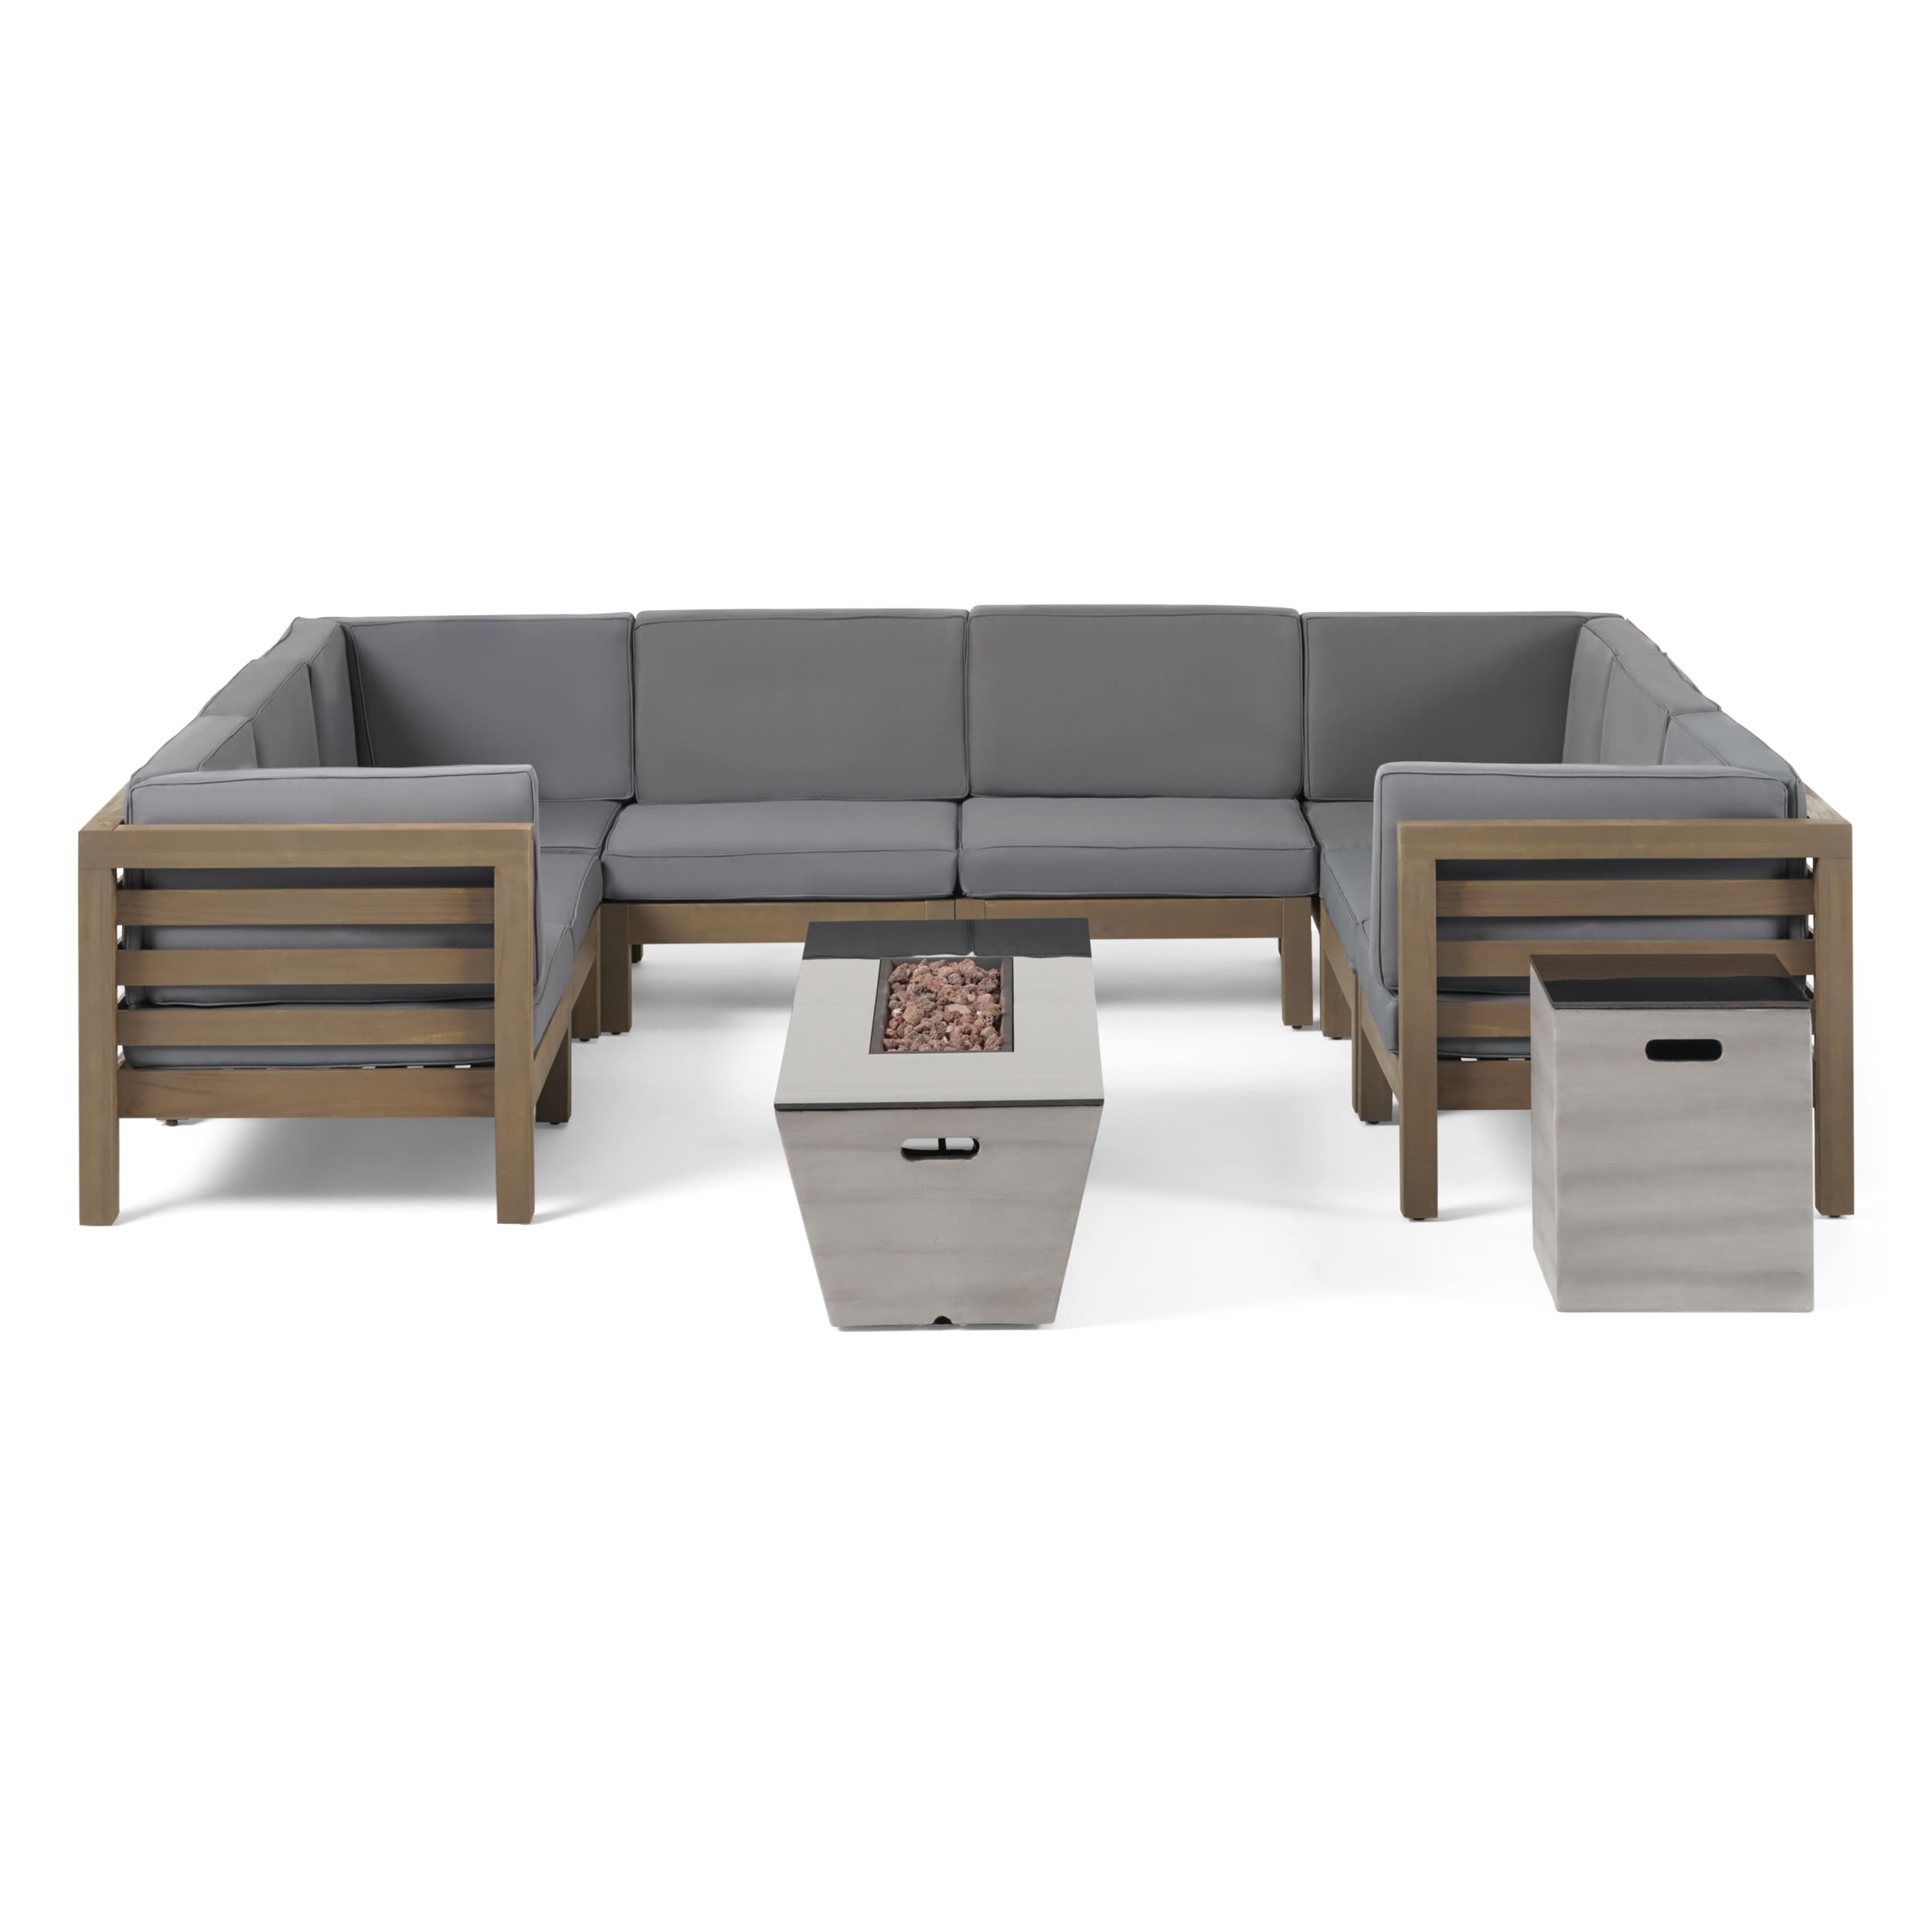 Lono Outdoor Modern 8 Seater Acacia Wood Sectional Sofa Set With Fire Pit And Tank Holder By Christopher Knight Home